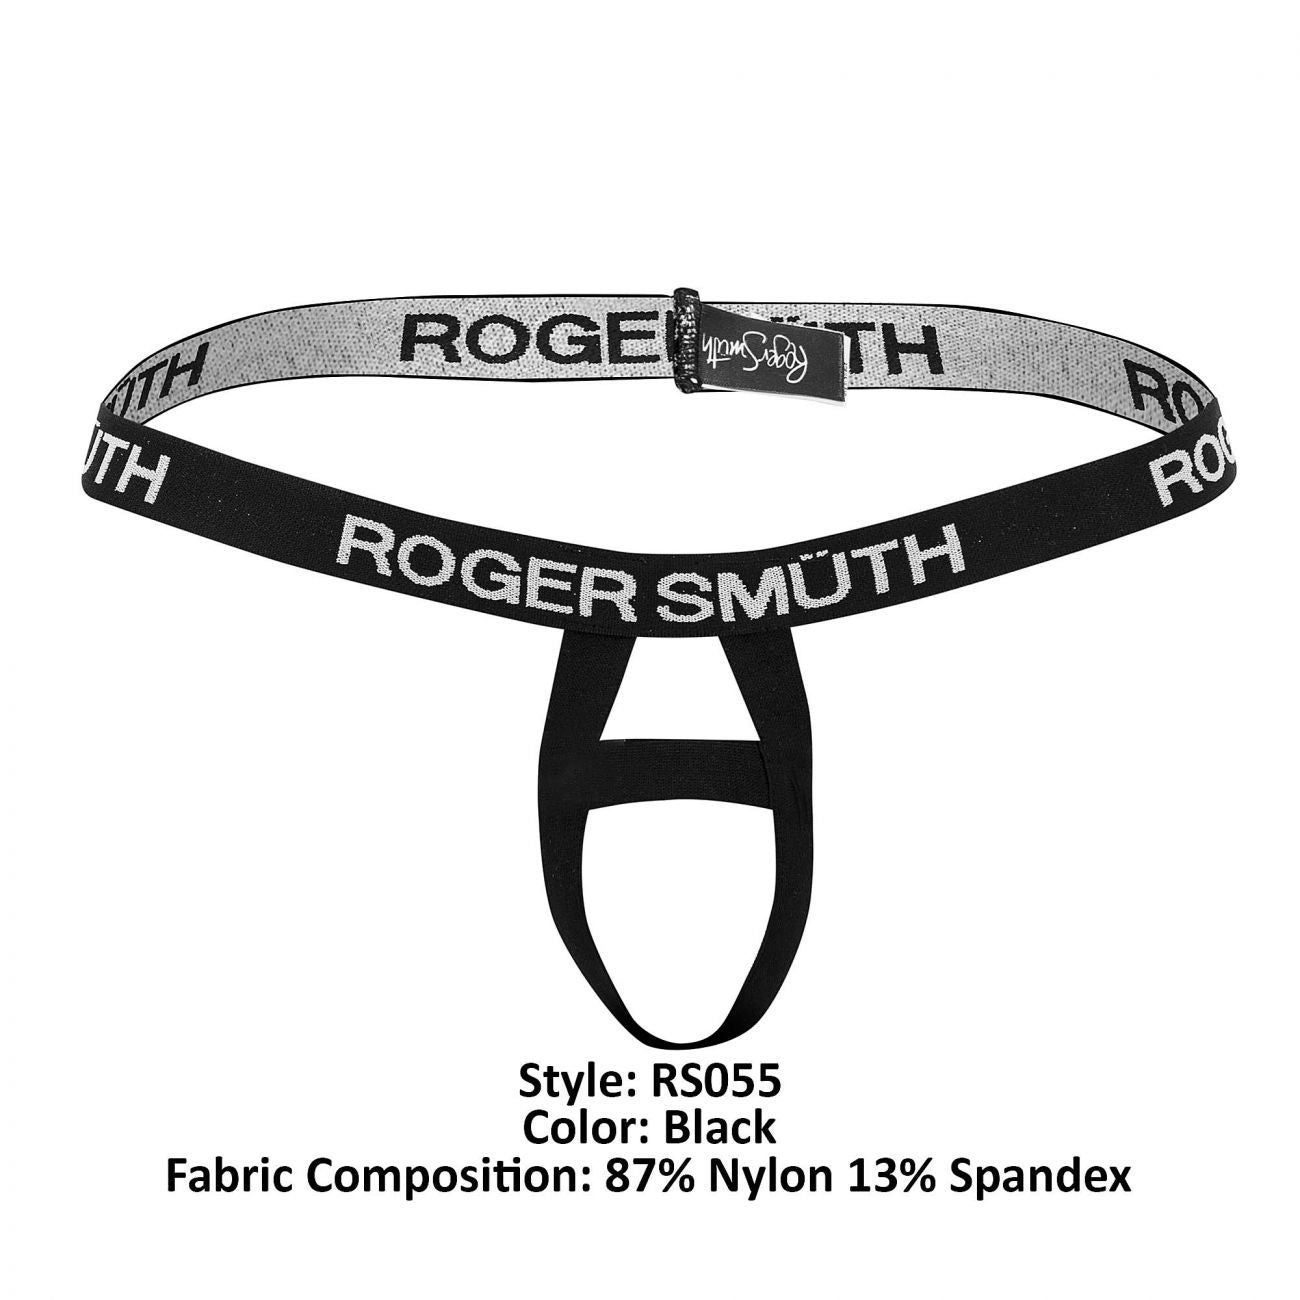 Roger Smuth RS055 Ball Lifter Black